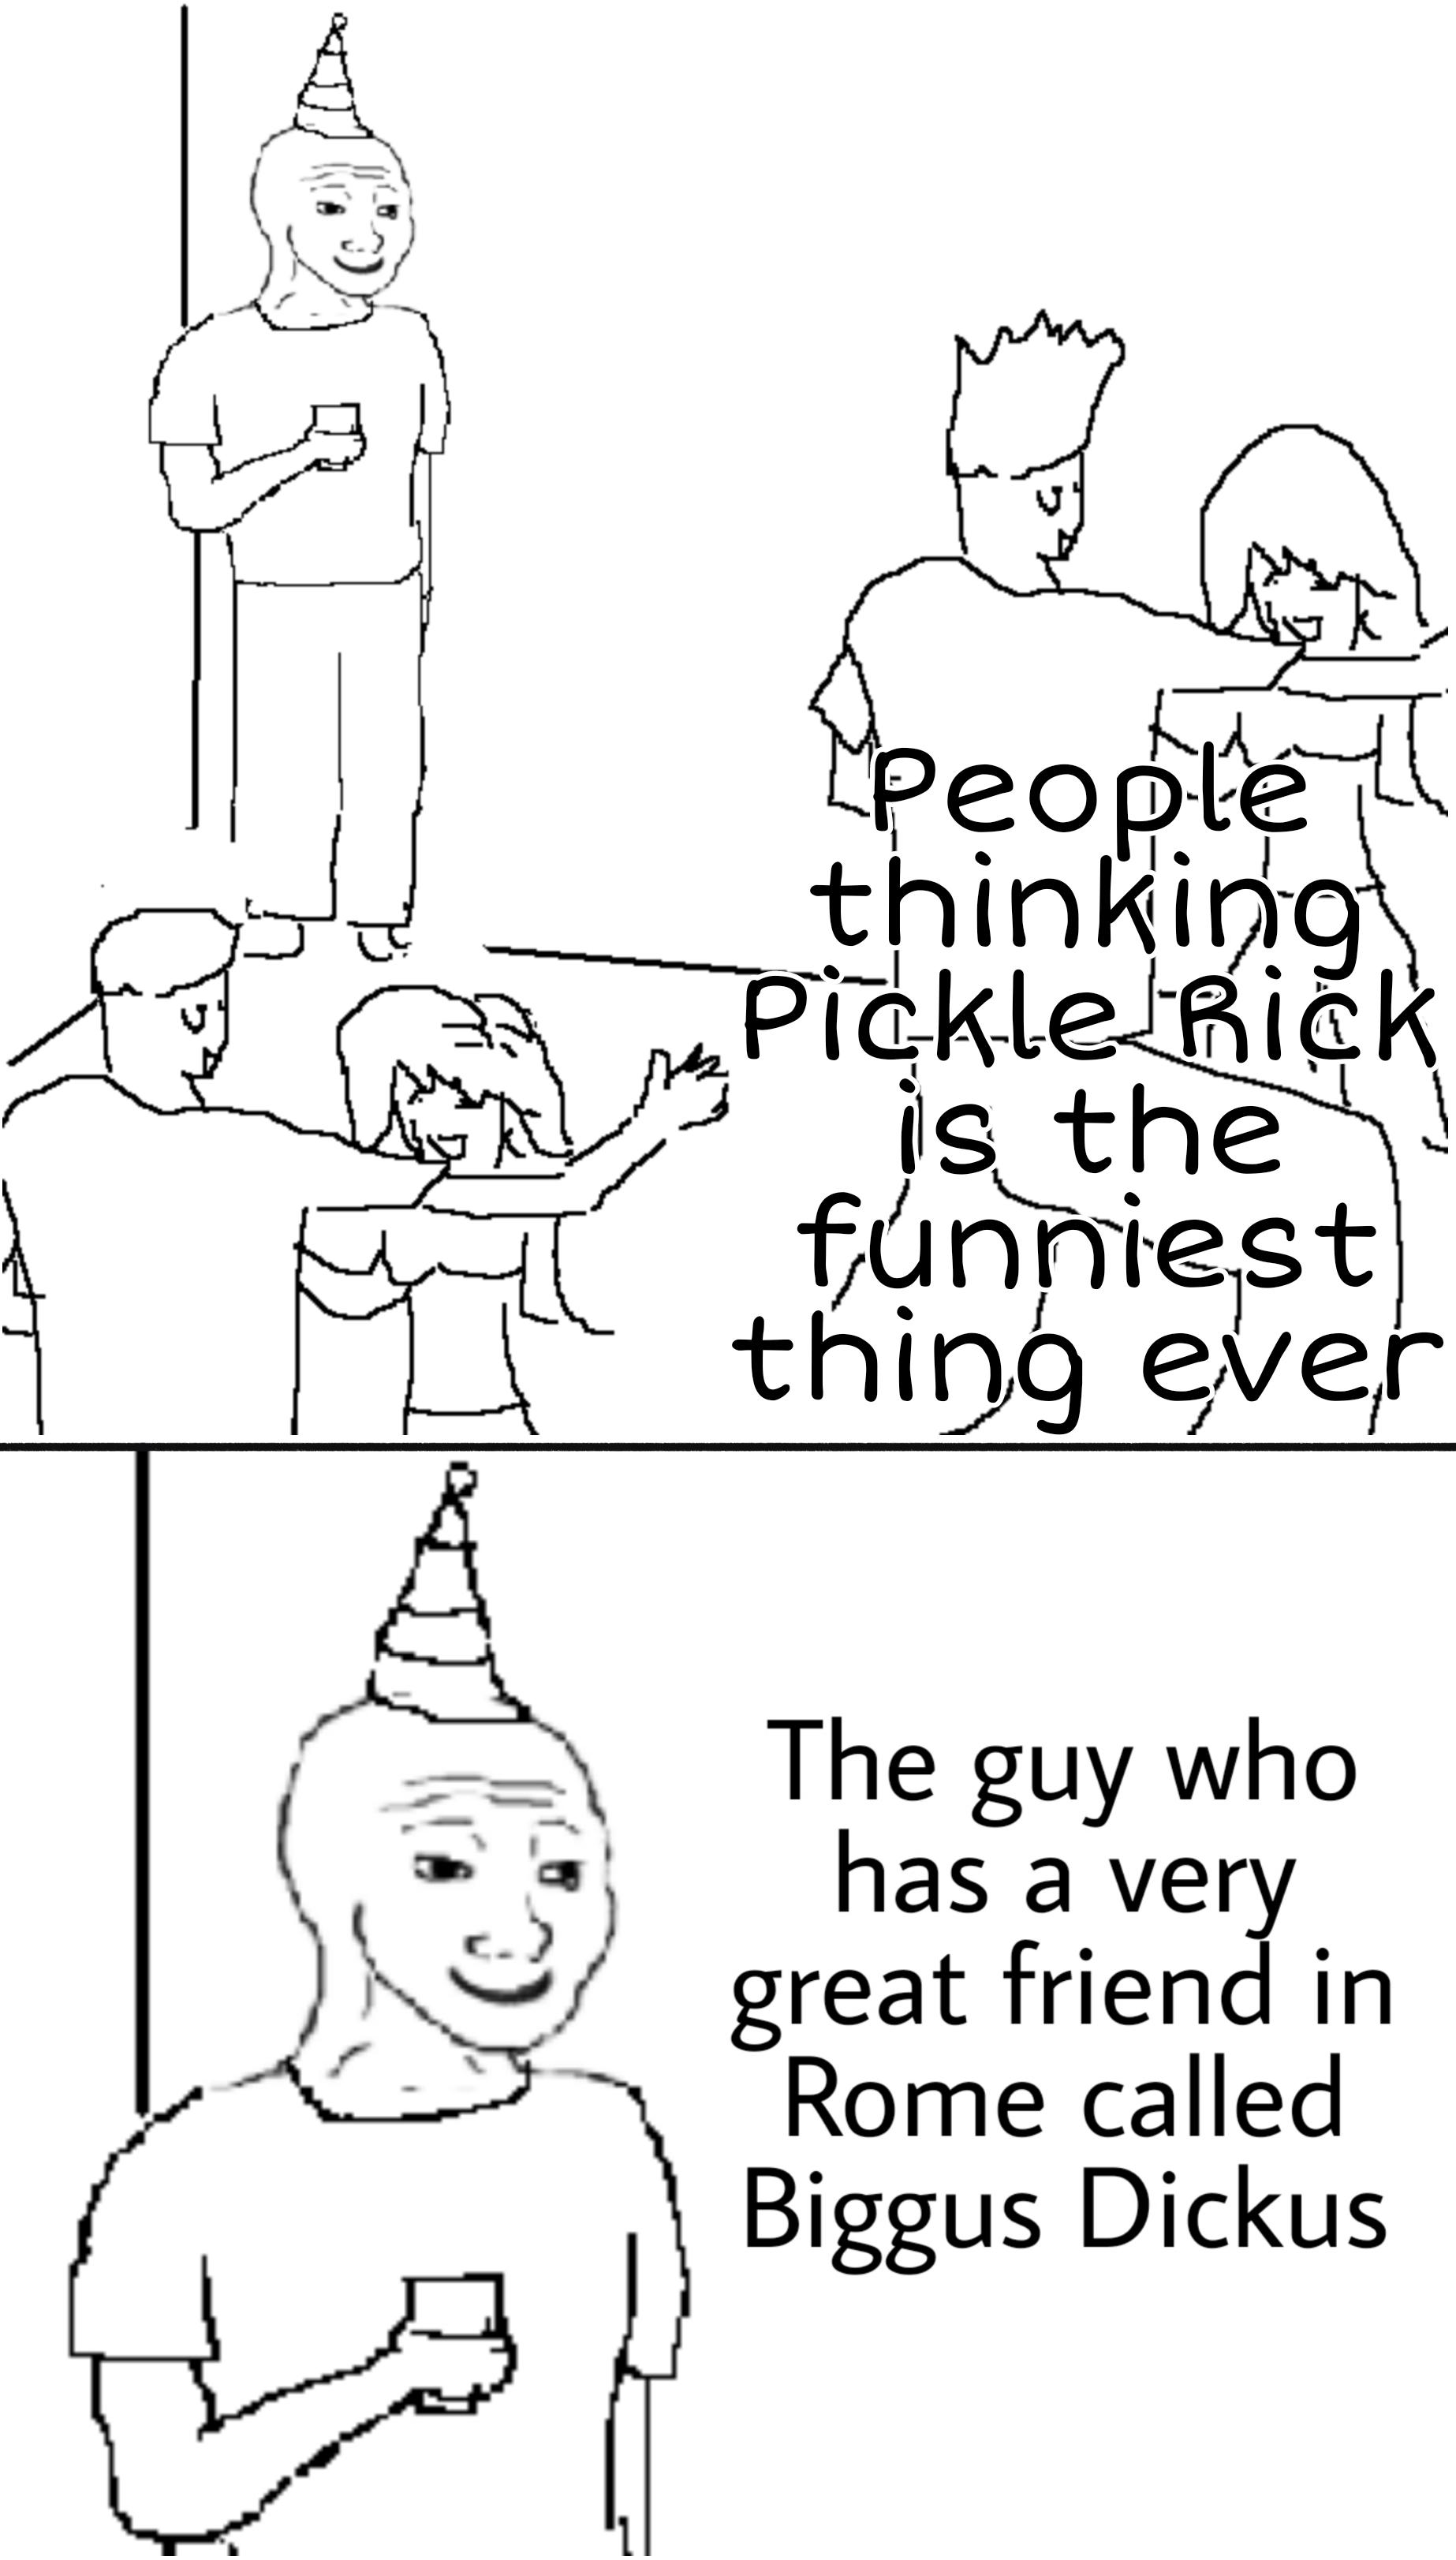 funny memes - dank memes - cartoon - m people thinking Pickle thick is the funniest thing ever The guy who has a very great friend in Rome called Biggus Dickus